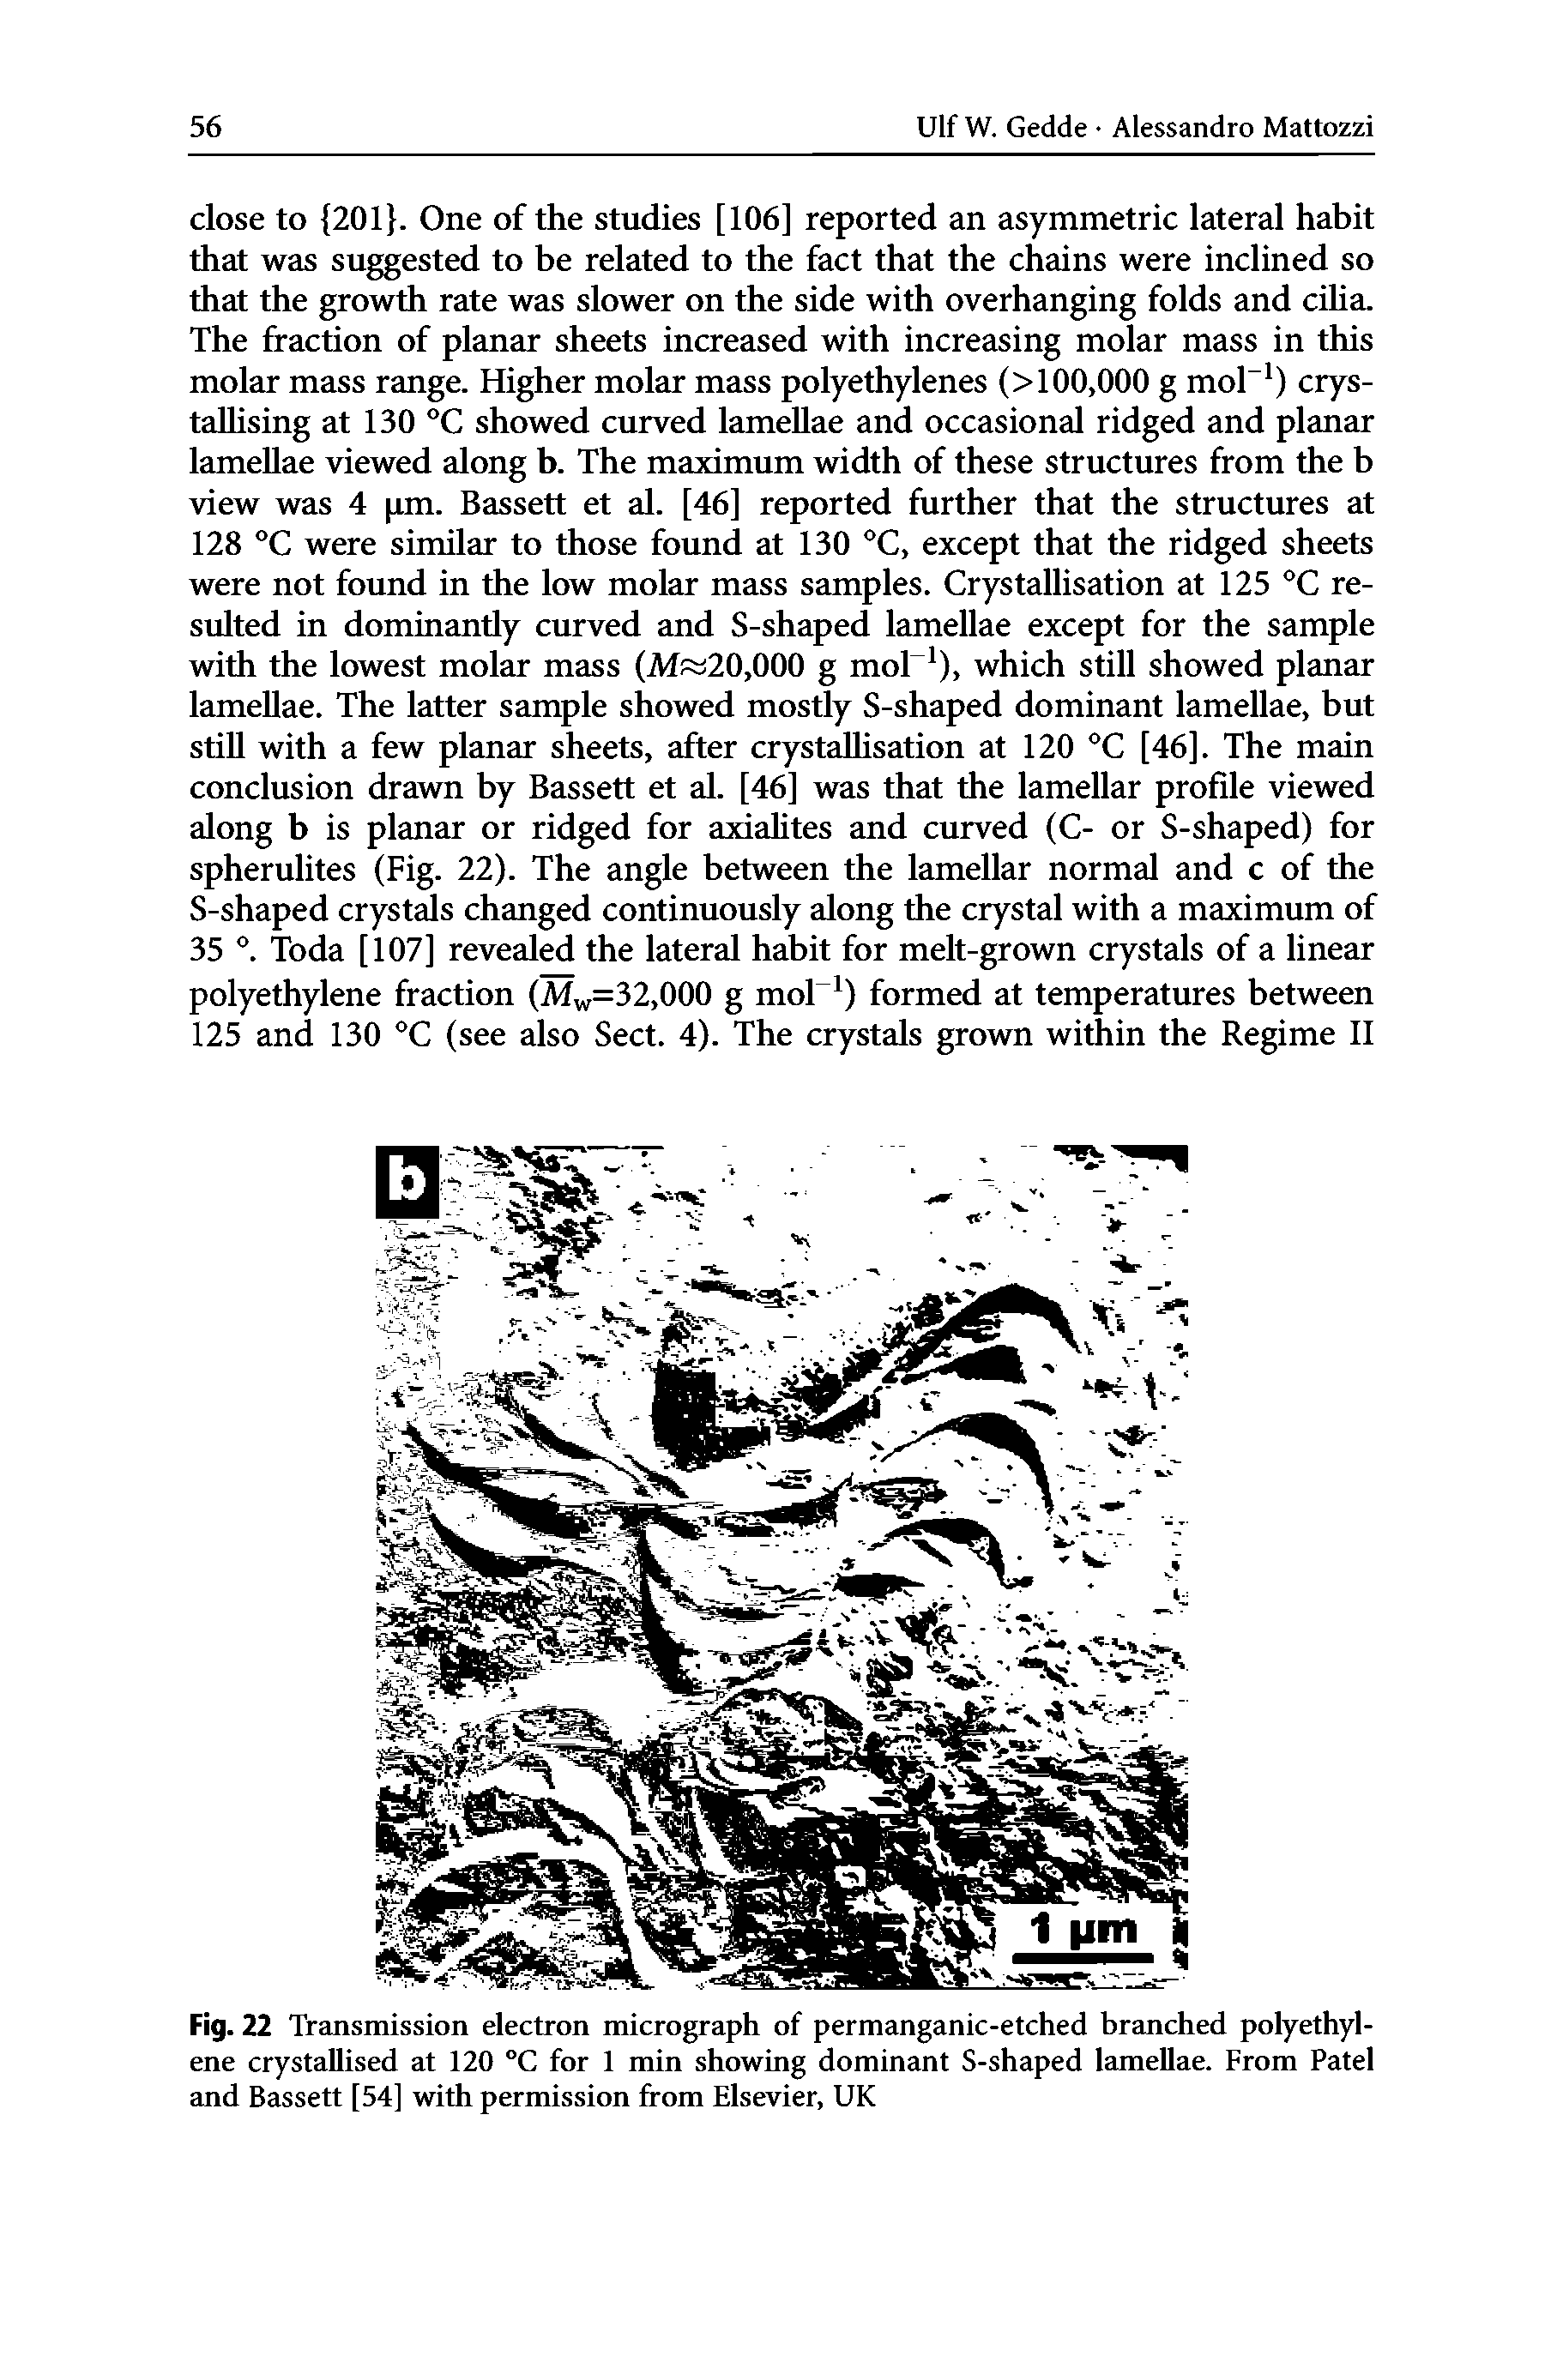 Fig. 22 Transmission electron micrograph of permanganic-etched branched polyethylene crystallised at 120 °C for 1 min showing dominant S-shaped lamellae. From Patel and Bassett [54] with permission from Elsevier, UK...